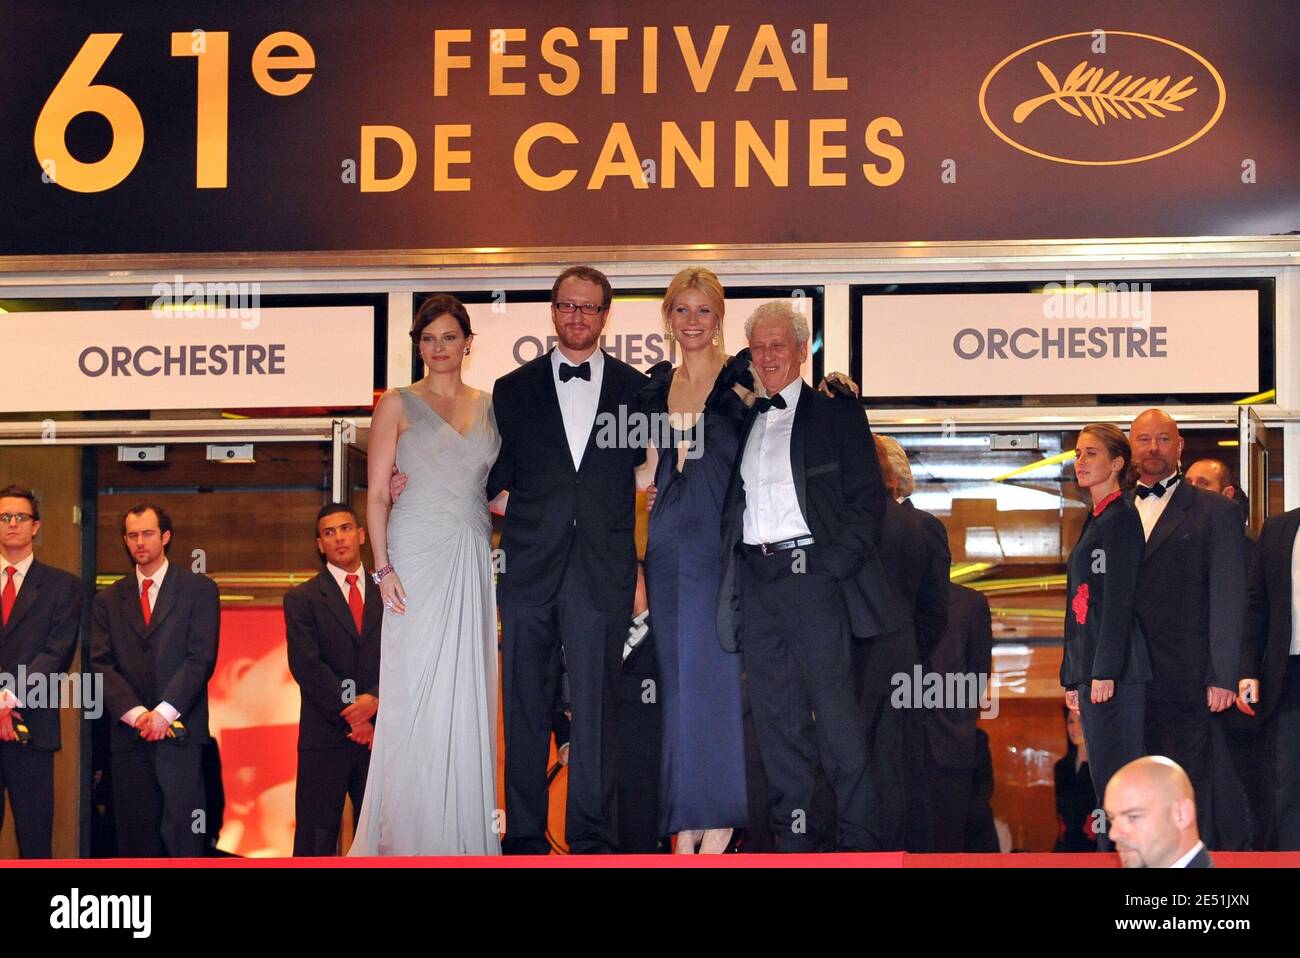 Vinessa Shaw, director James Gray, Gwyneth Paltrow and Moshonov Moni arriving at the Palais des Festivals in Cannes, Southern France, May 19, 2008, for the screening of James Gray's Two Lovers presented in competition at the 61st Cannes Film Festival. Photo by Hahn-Nebinger-Orban/ABACAPRESS.COM Stock Photo